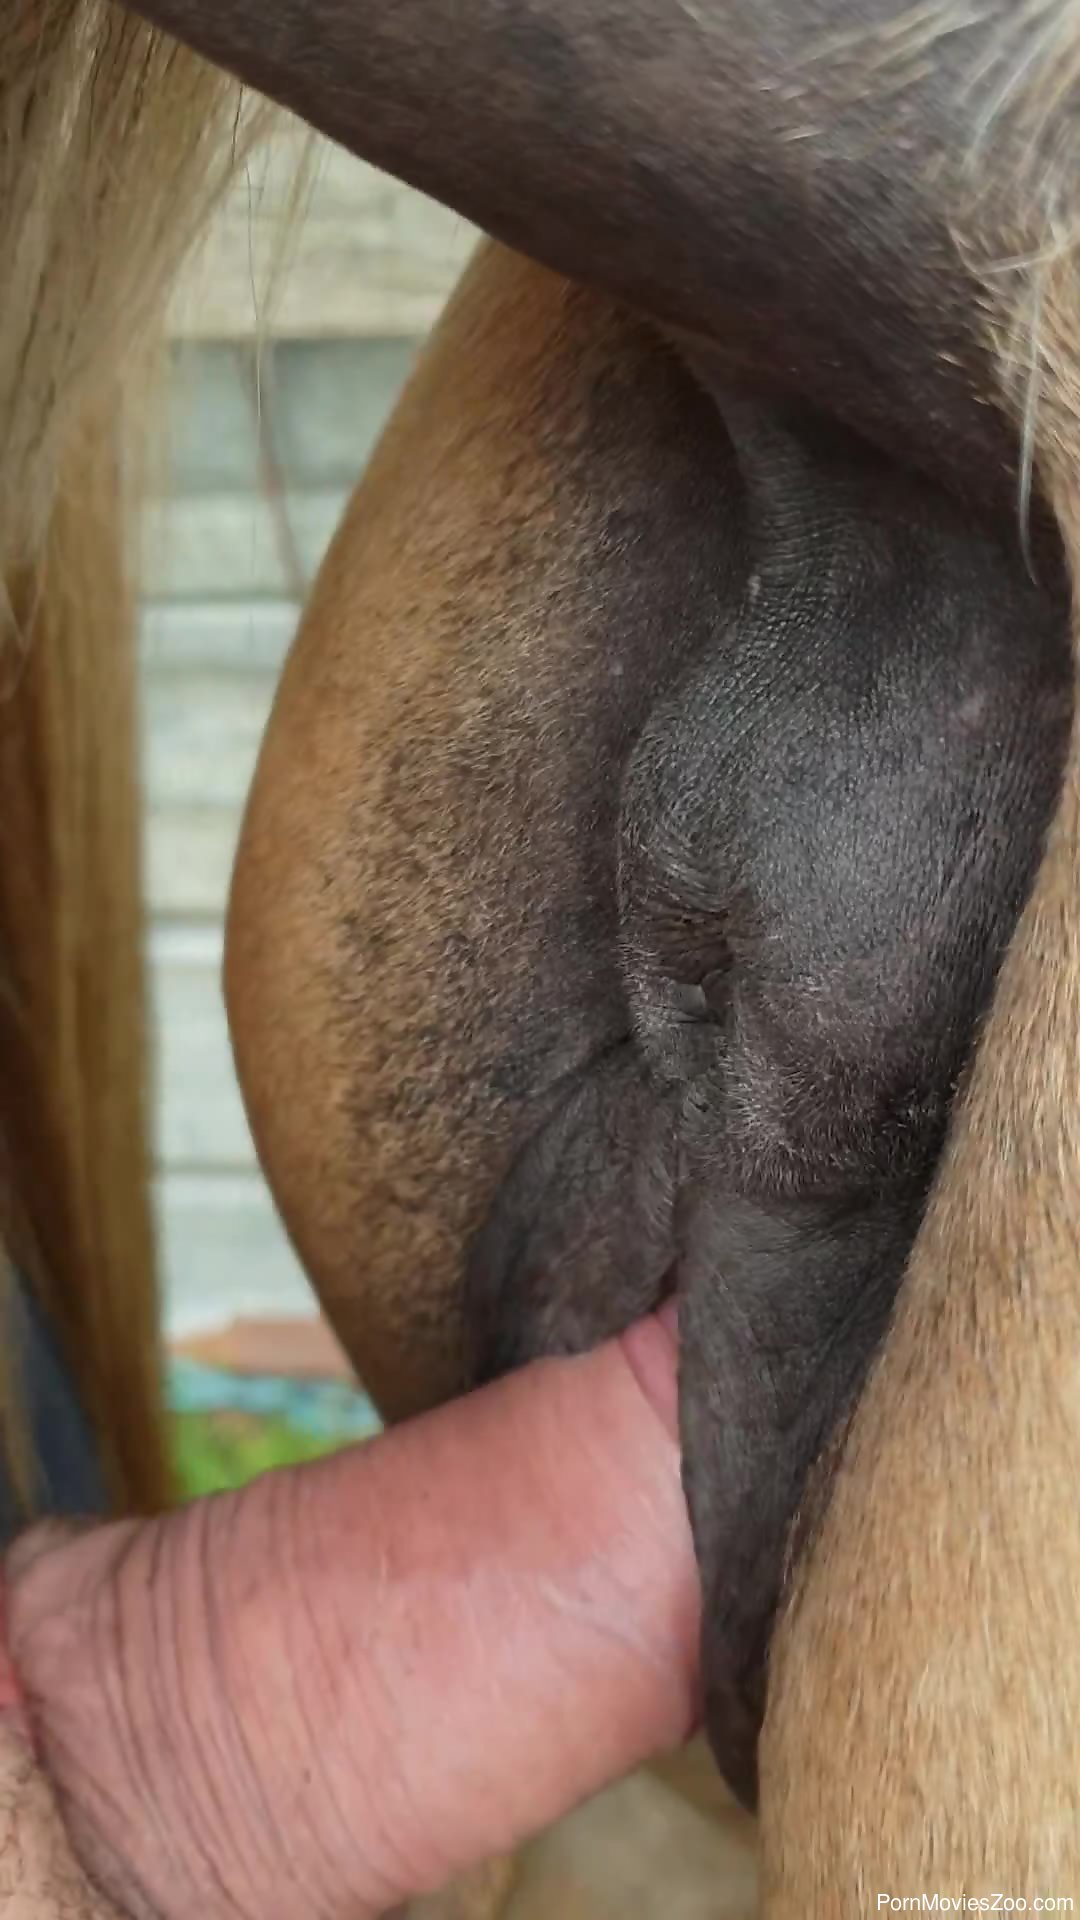 Man Fucking Horse Pussy - Juicy horse pussy is just like a fucking magnet